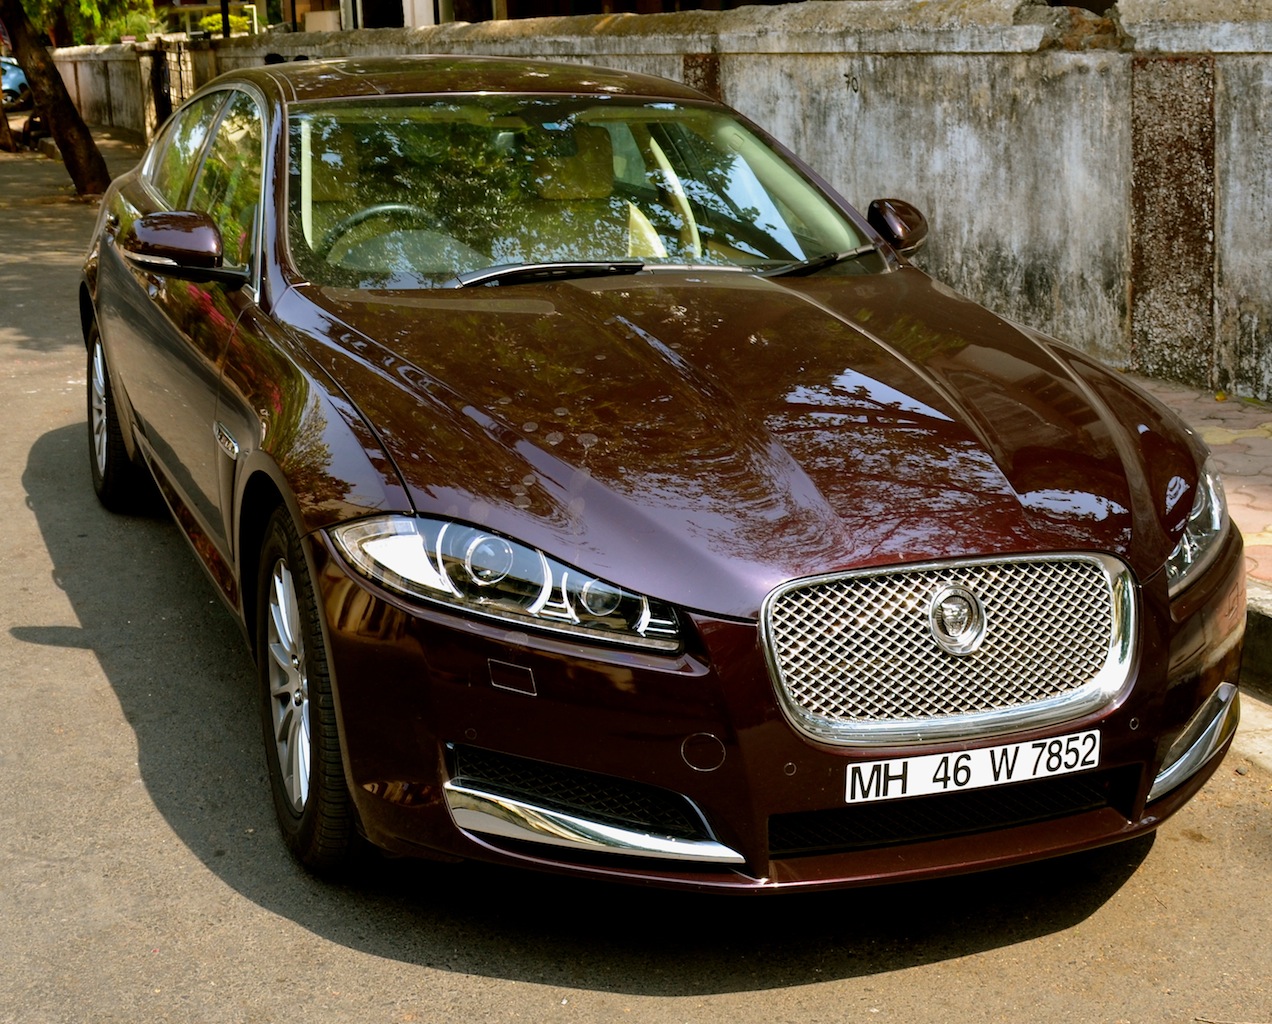 Jaguar to launch updated XF this month in India - India Today